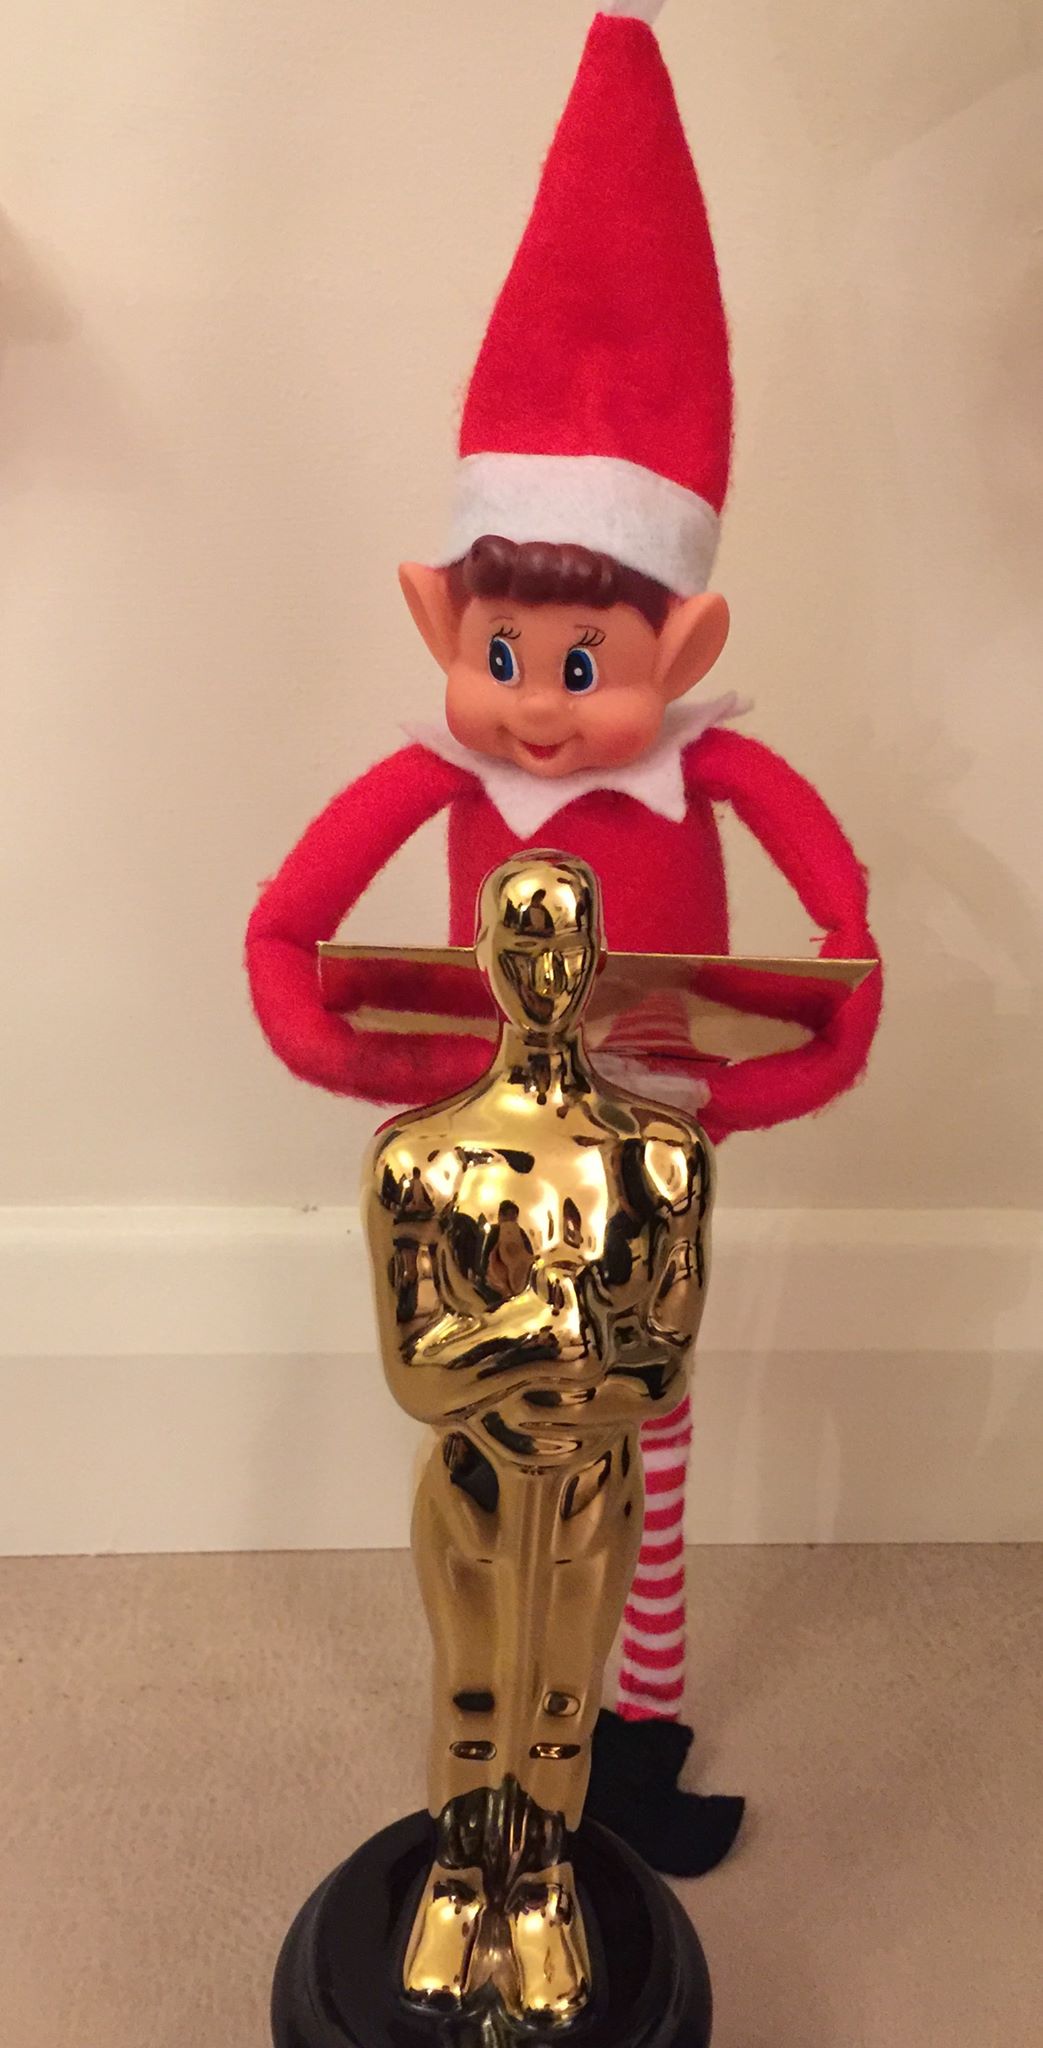 Winner for the Most Likes and Comments on Our “Elfie-Selfies”